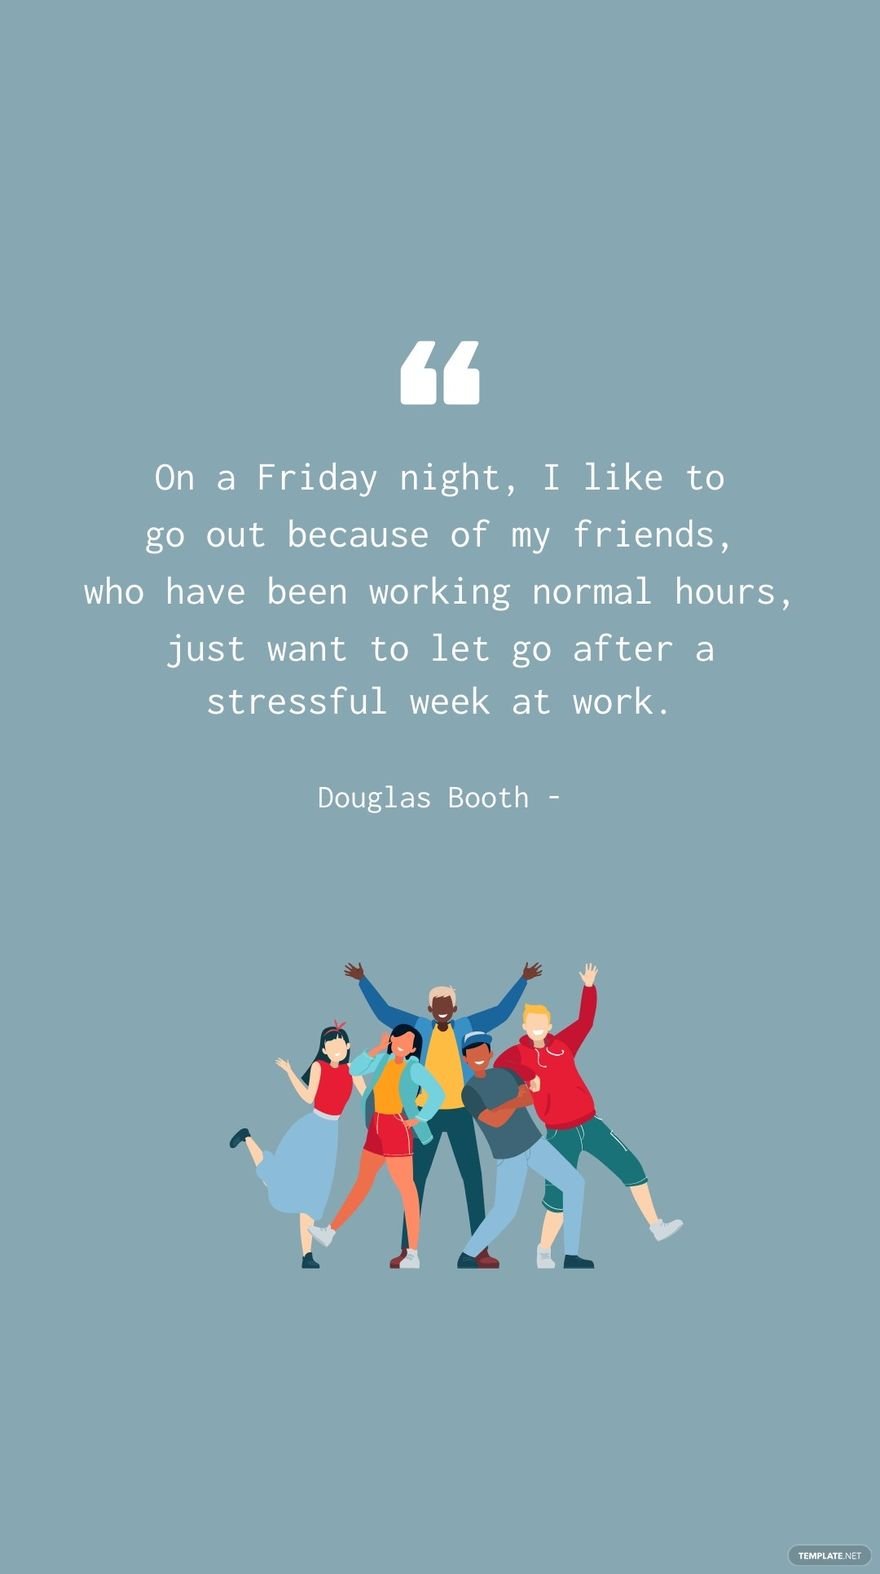 Douglas Booth - On a Friday night, I like to go out because my friends, who have been working normal hours, just want to let go after a stressful week at work.